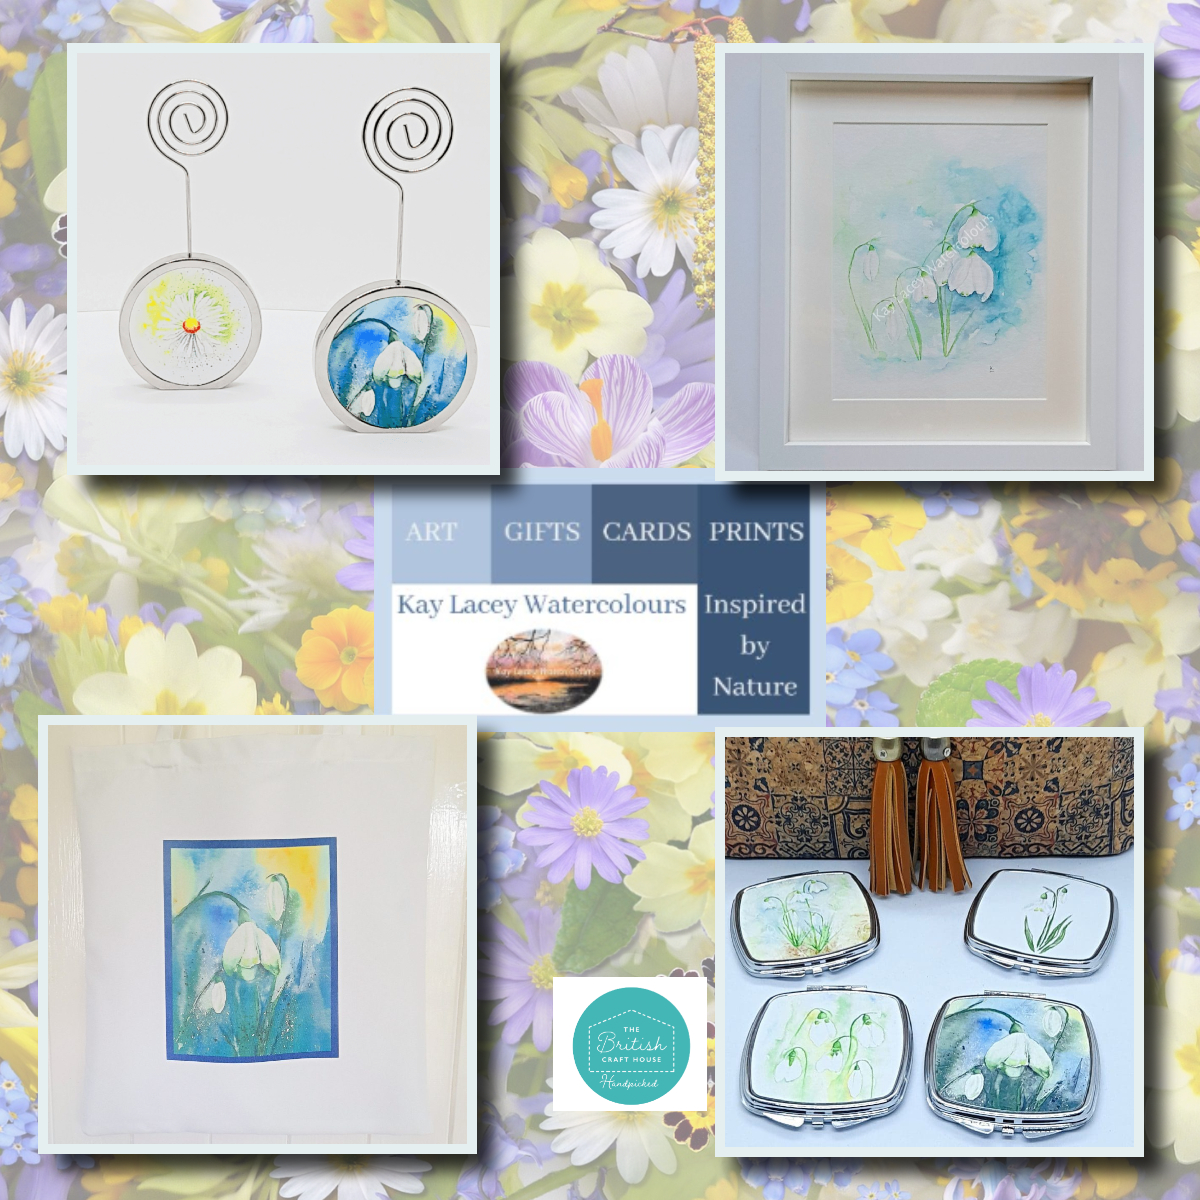 Evening everyone, hope you've all had a lovely weekend, I would like to share this amazing collection of snowdrops from @kblacey do pop over and show Kay some love :)

#tbchboosters #tbch #sundayshoutout #artgifts #handmade